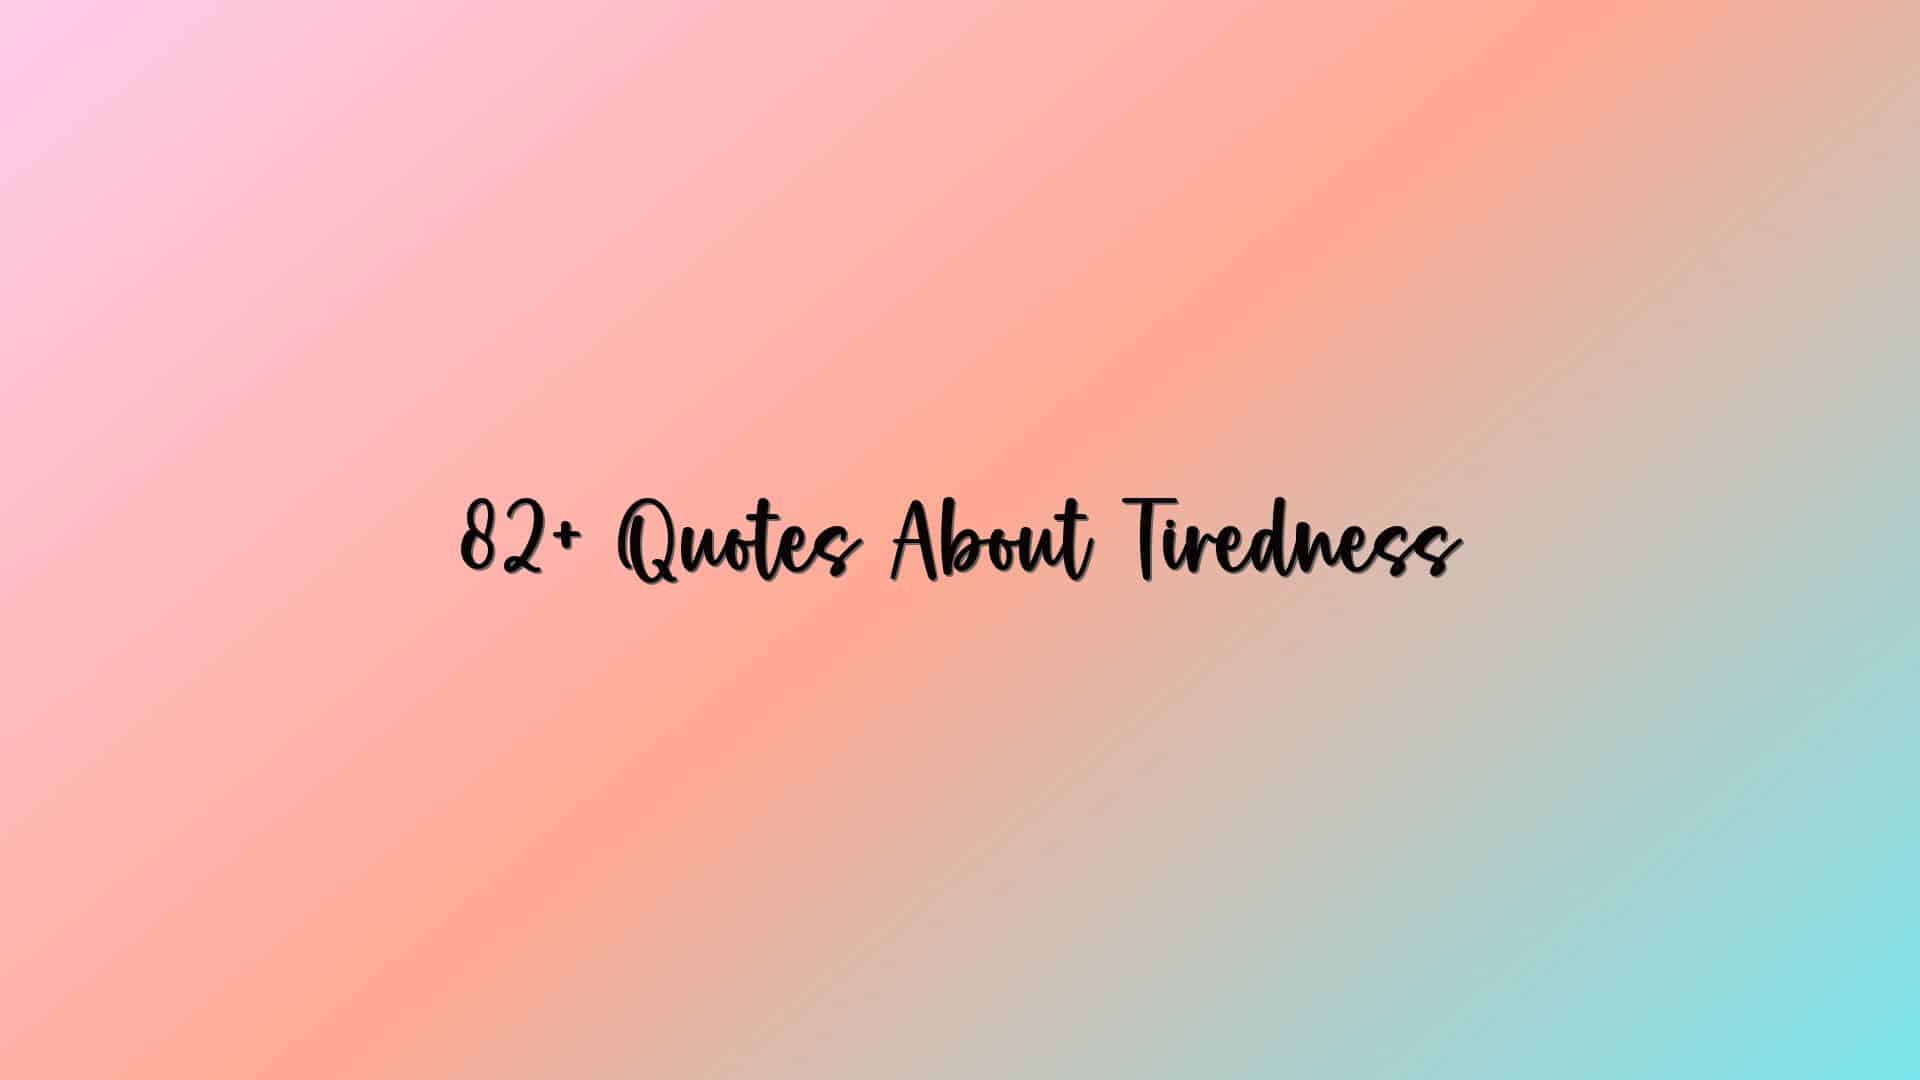 82+ Quotes About Tiredness